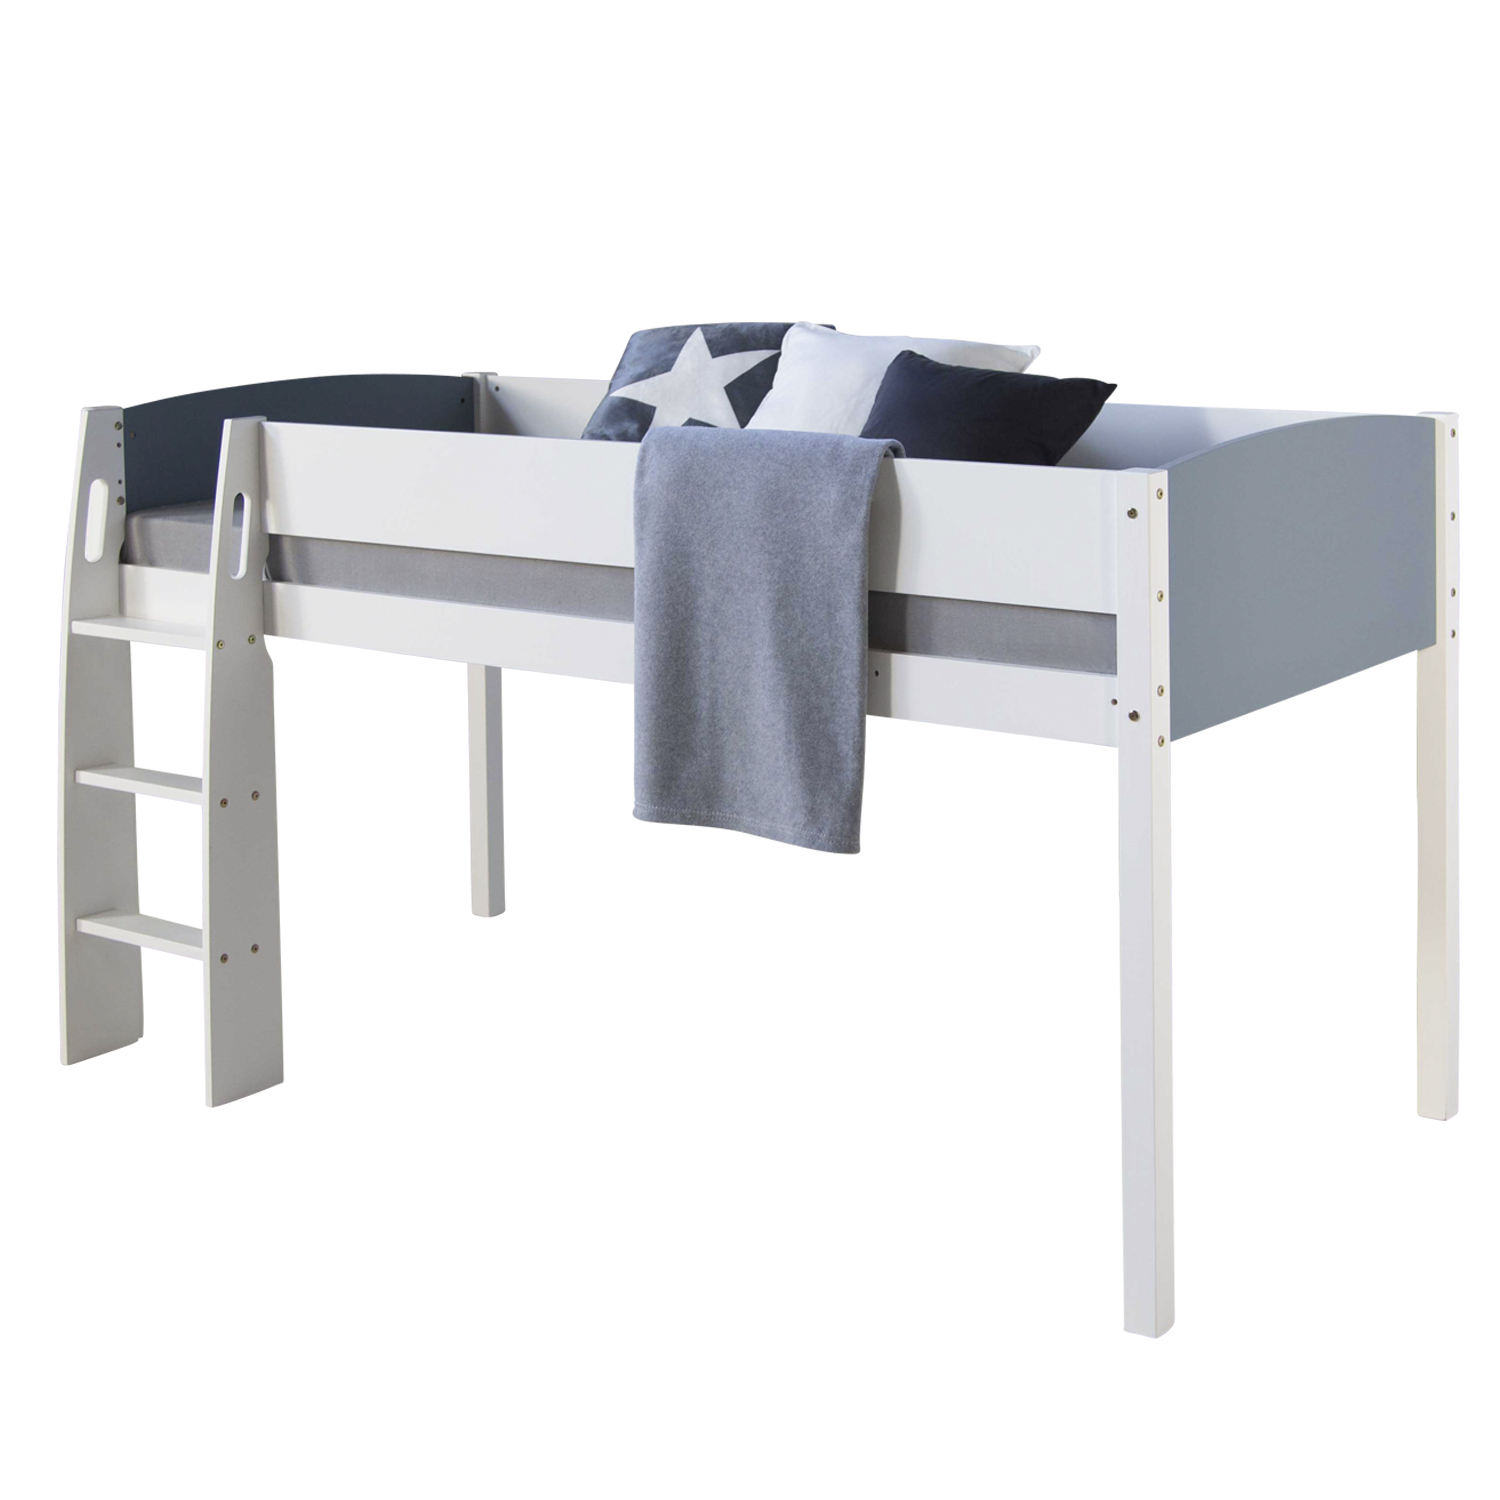 Bunk Bed child bed ladder 90x200 solid youth bed white grey